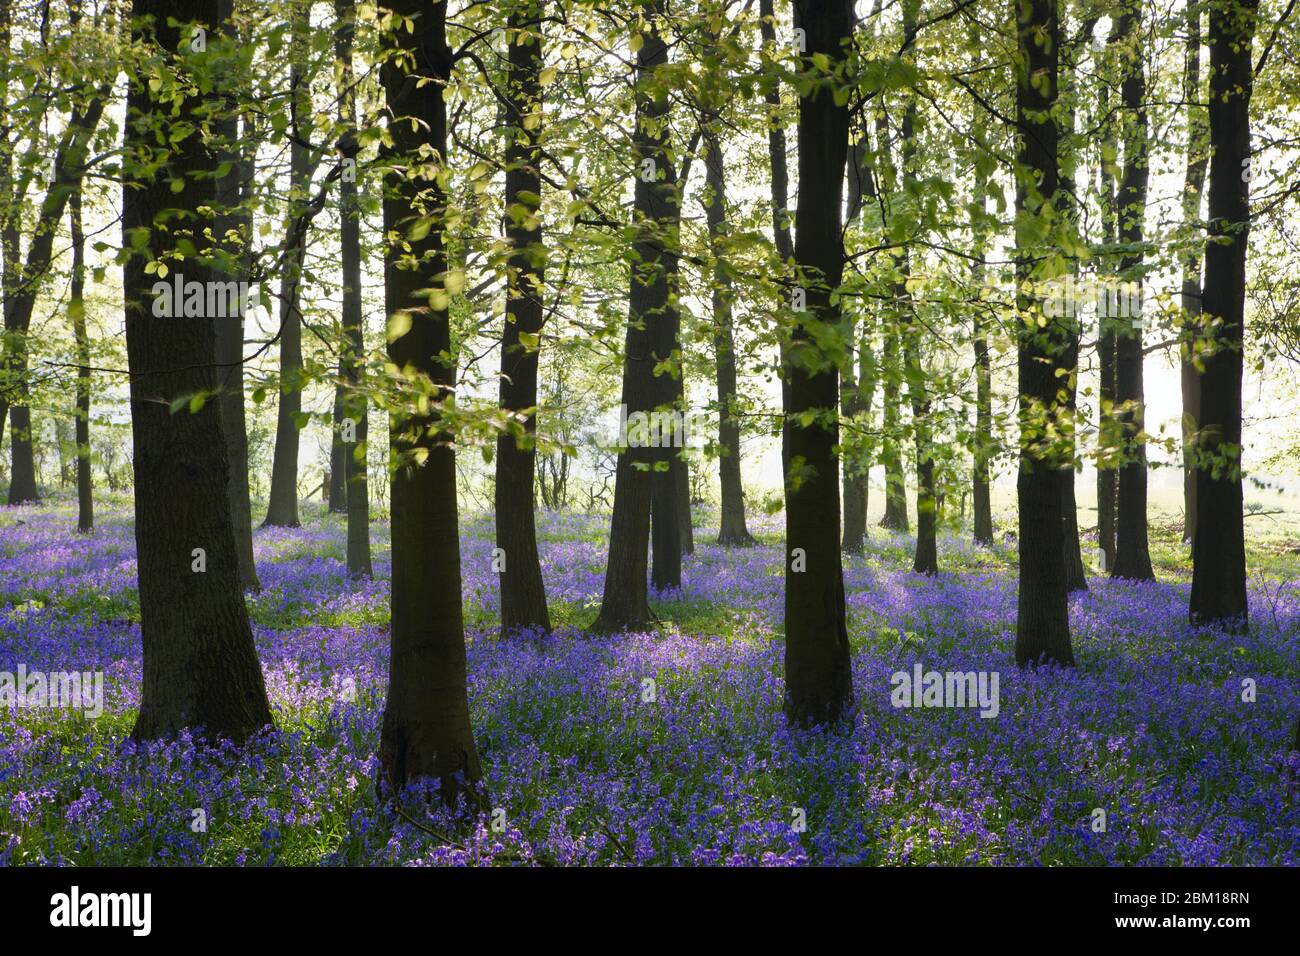 Dockey wood bluebells cover the woodland floor with a carpet of blue during spring Stock Photo